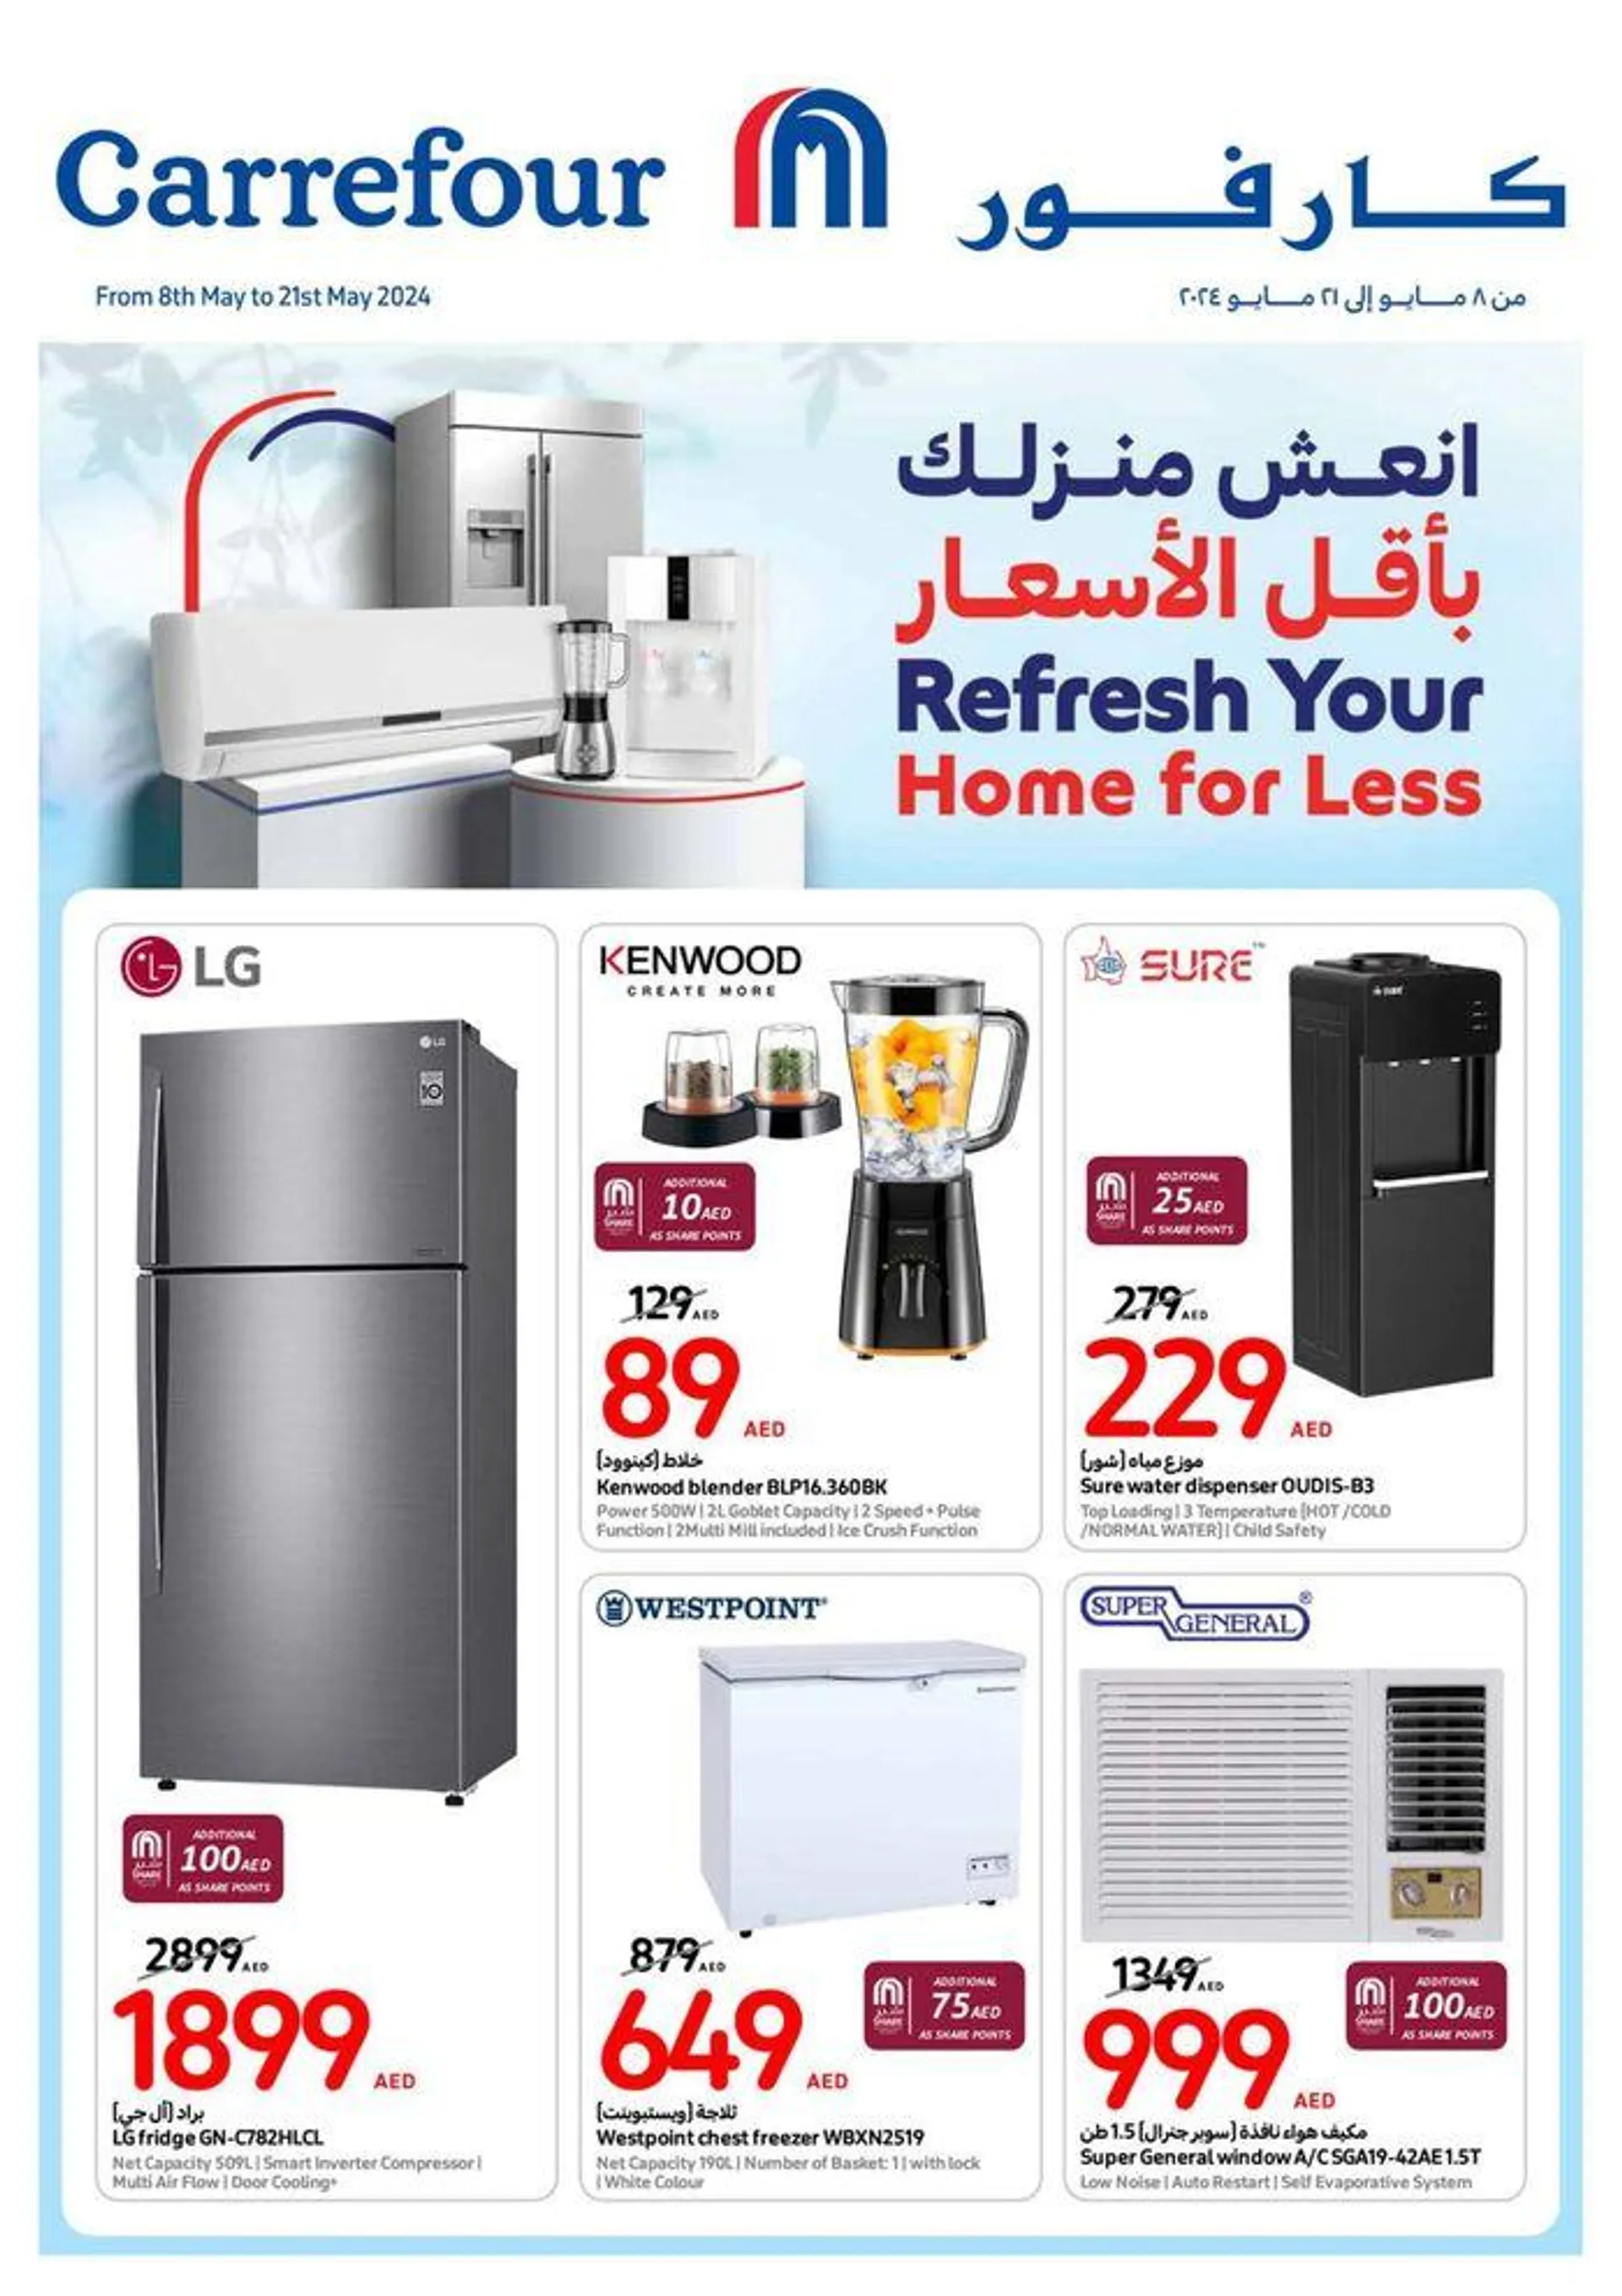 Refresh Your Home For Less - 1